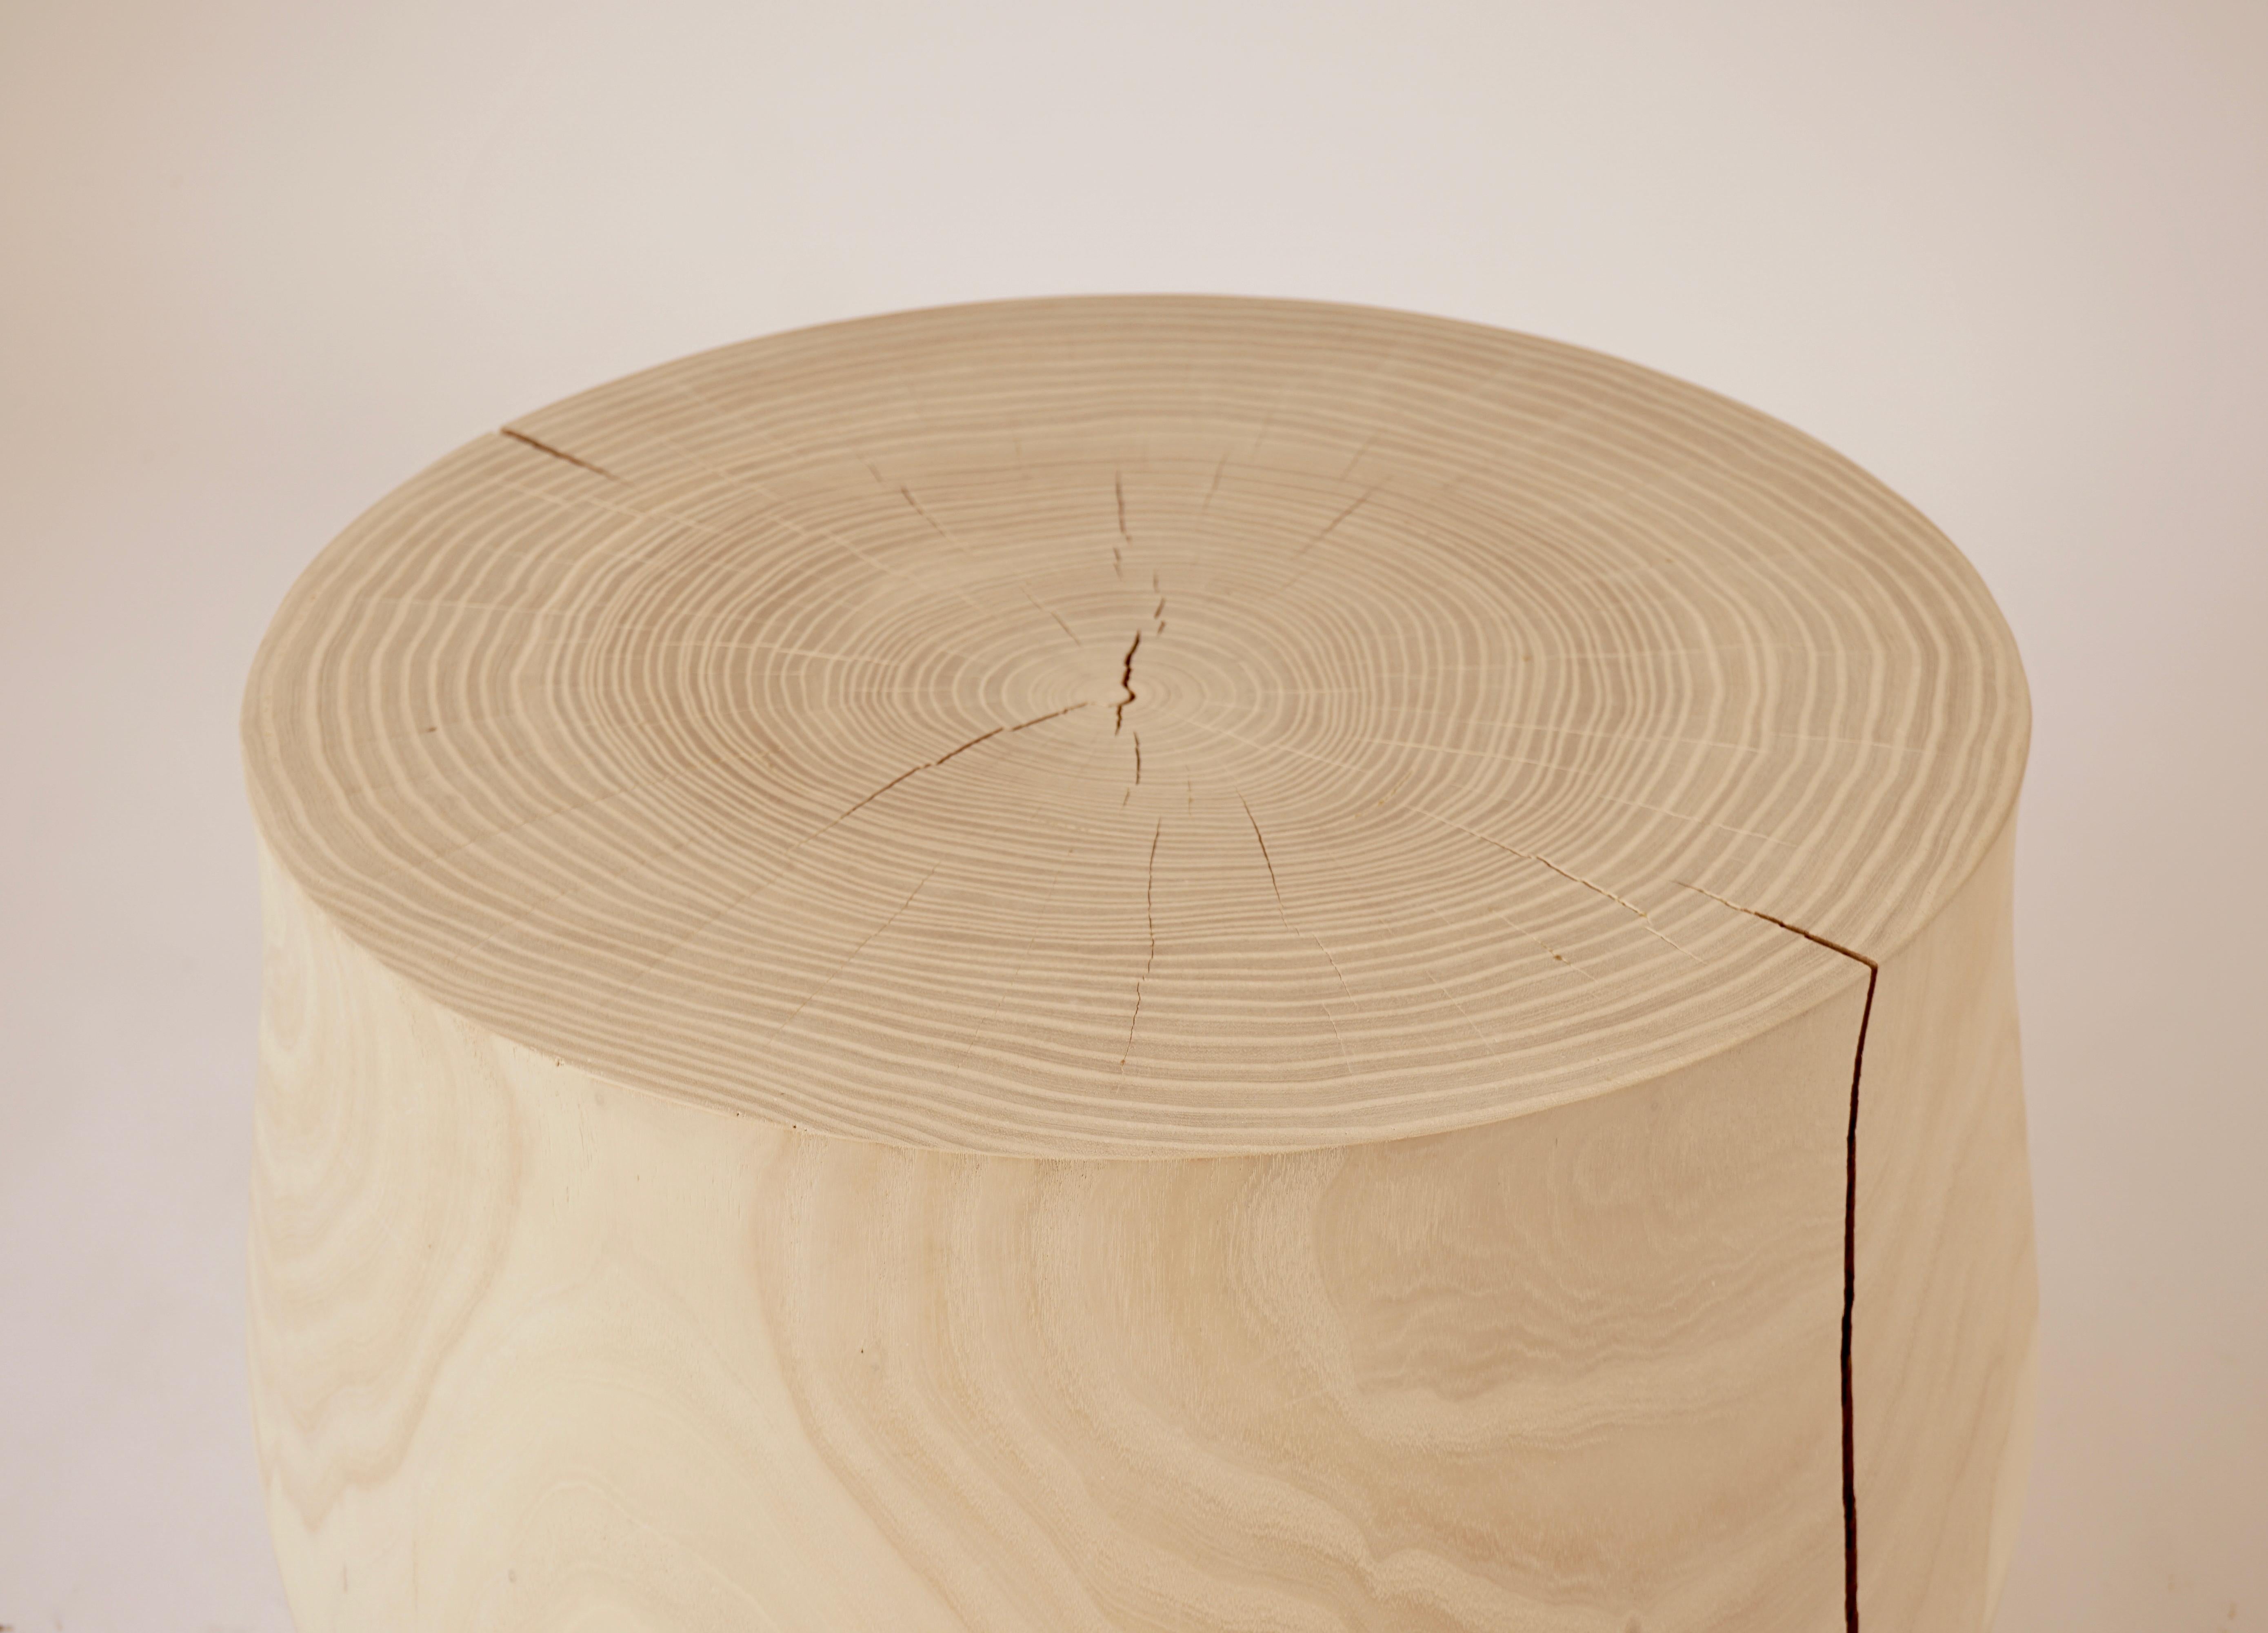 This newest shape was added to Lehrecke's pedestal collection in 2018. The piece was turned on a custom built lathe, set to dry for three months and then pickled and given an oil waxed finish. Catalpa is fast growing and locally sourced wood from